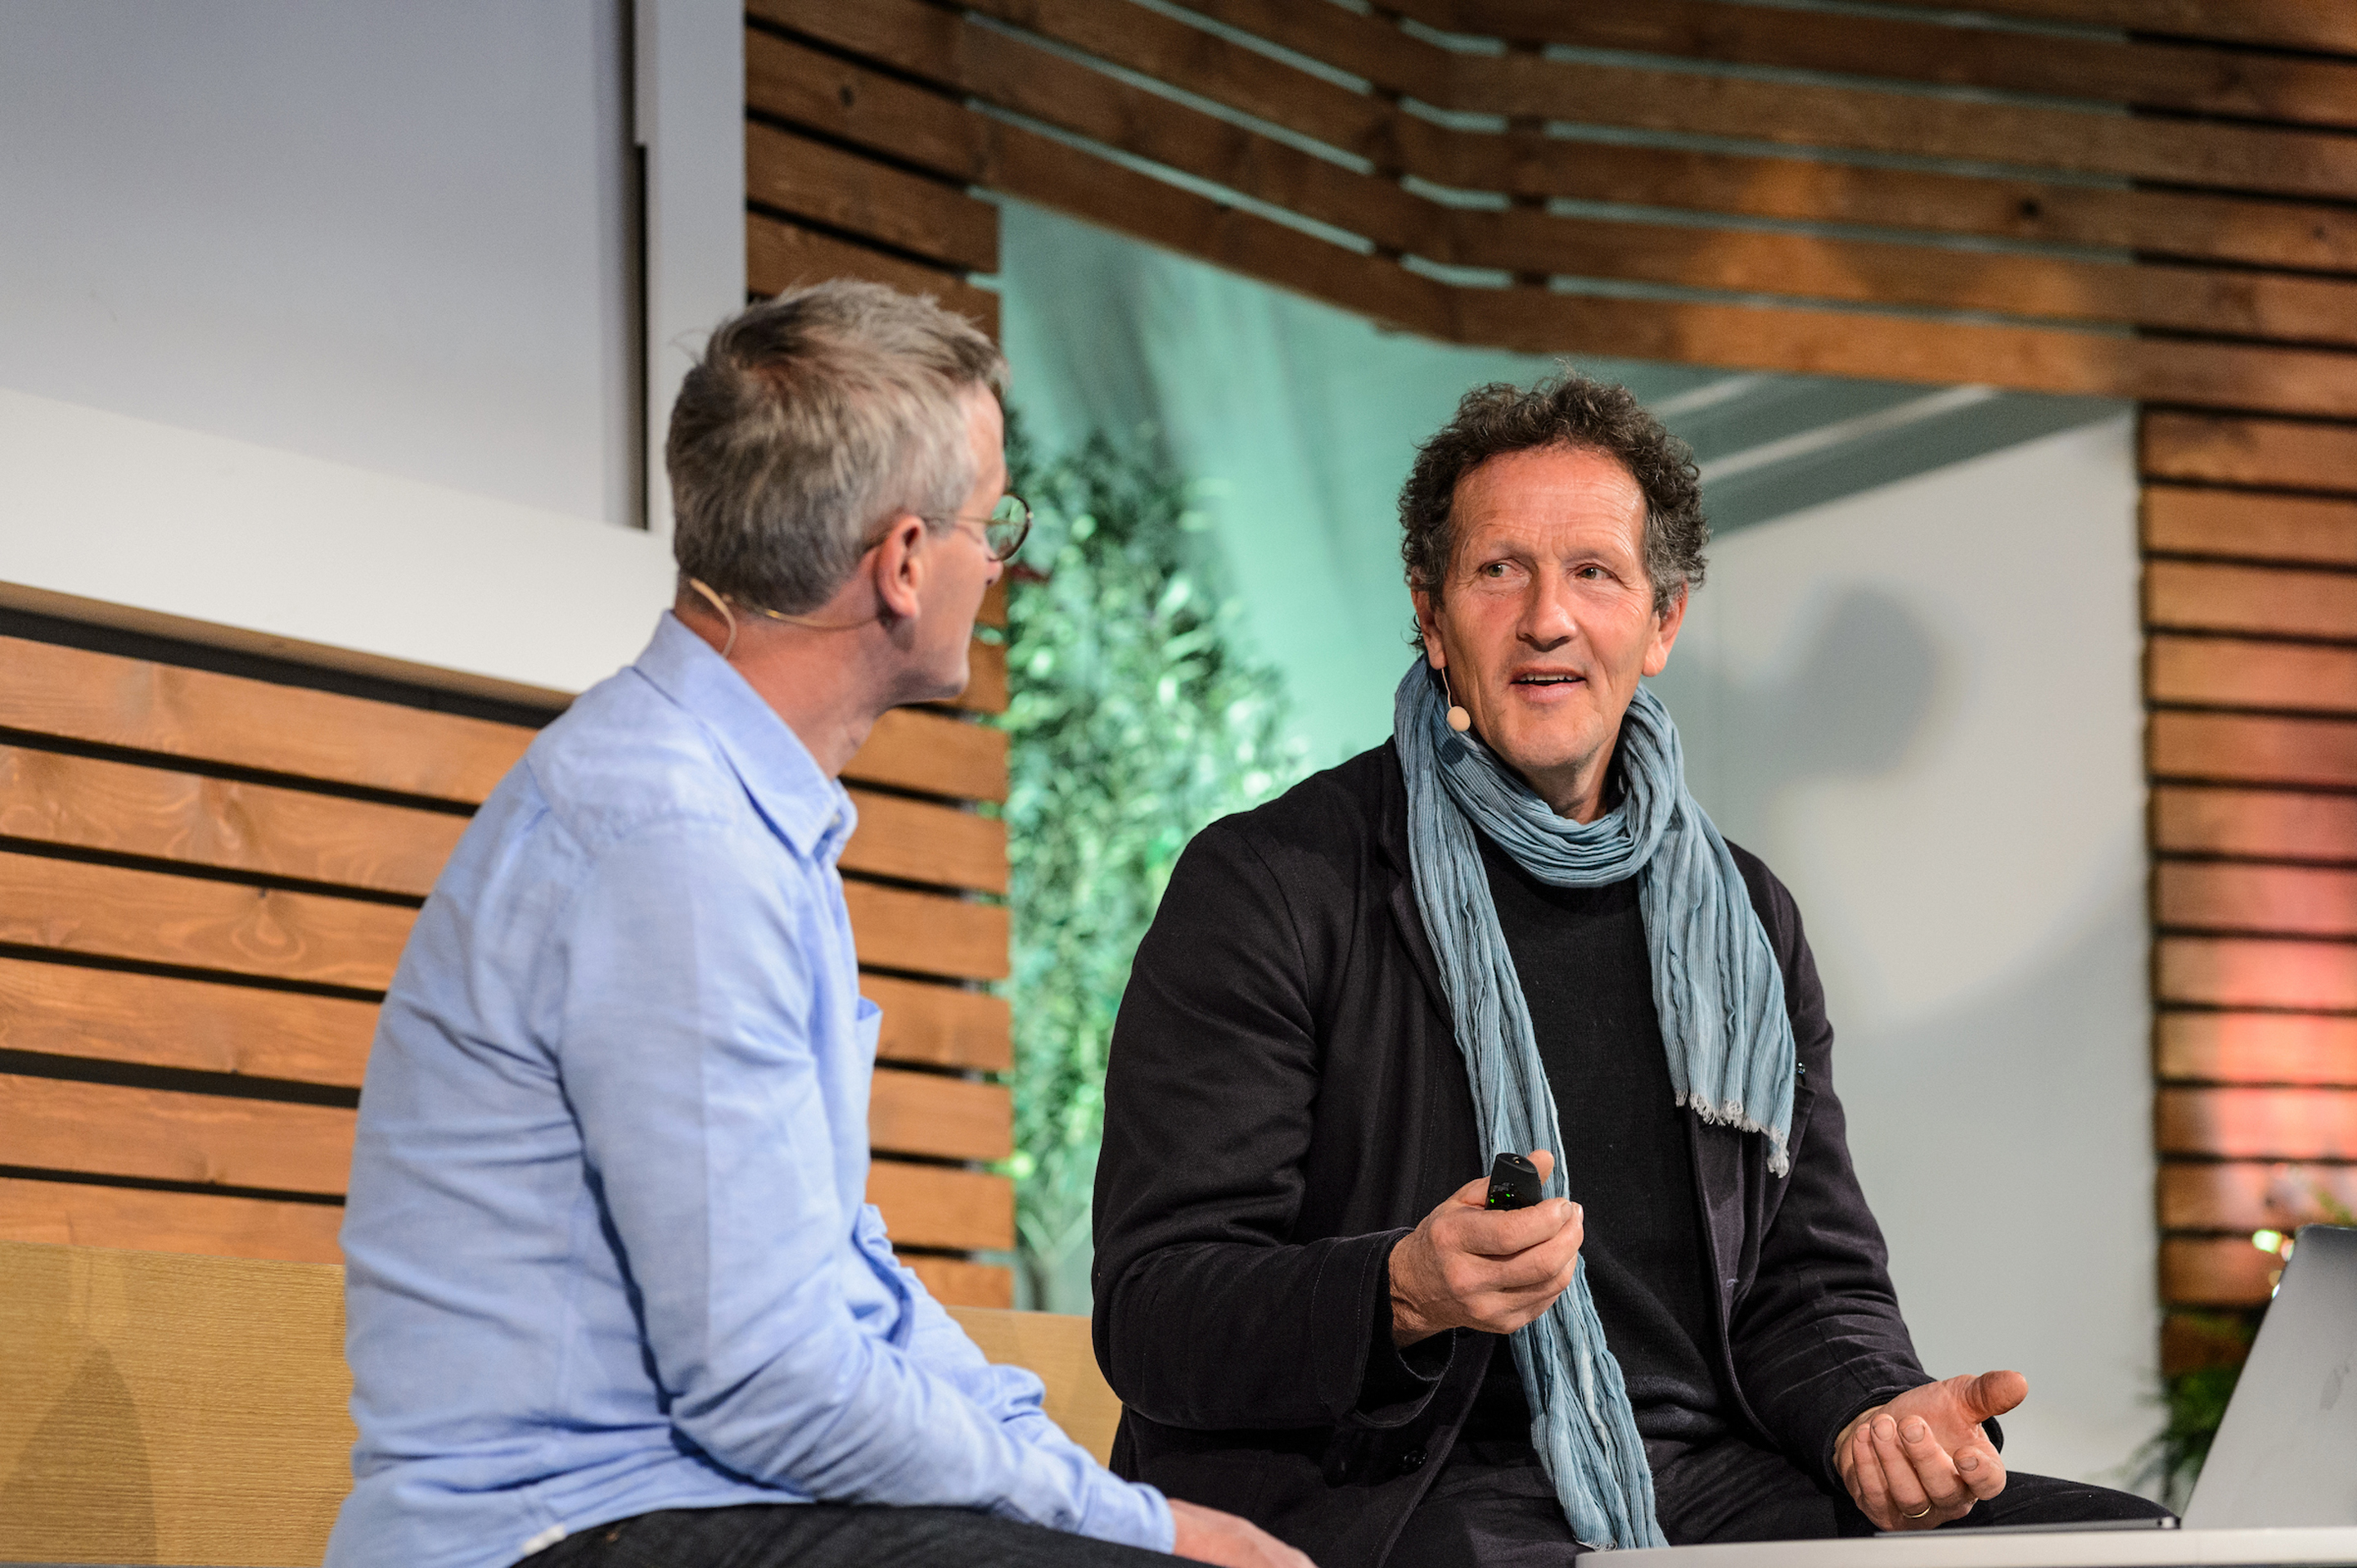 Meet Monty Don at this year's BBC Gardeners' World Live (Jason Ingram/BBC Gardeners' World Live/PA)